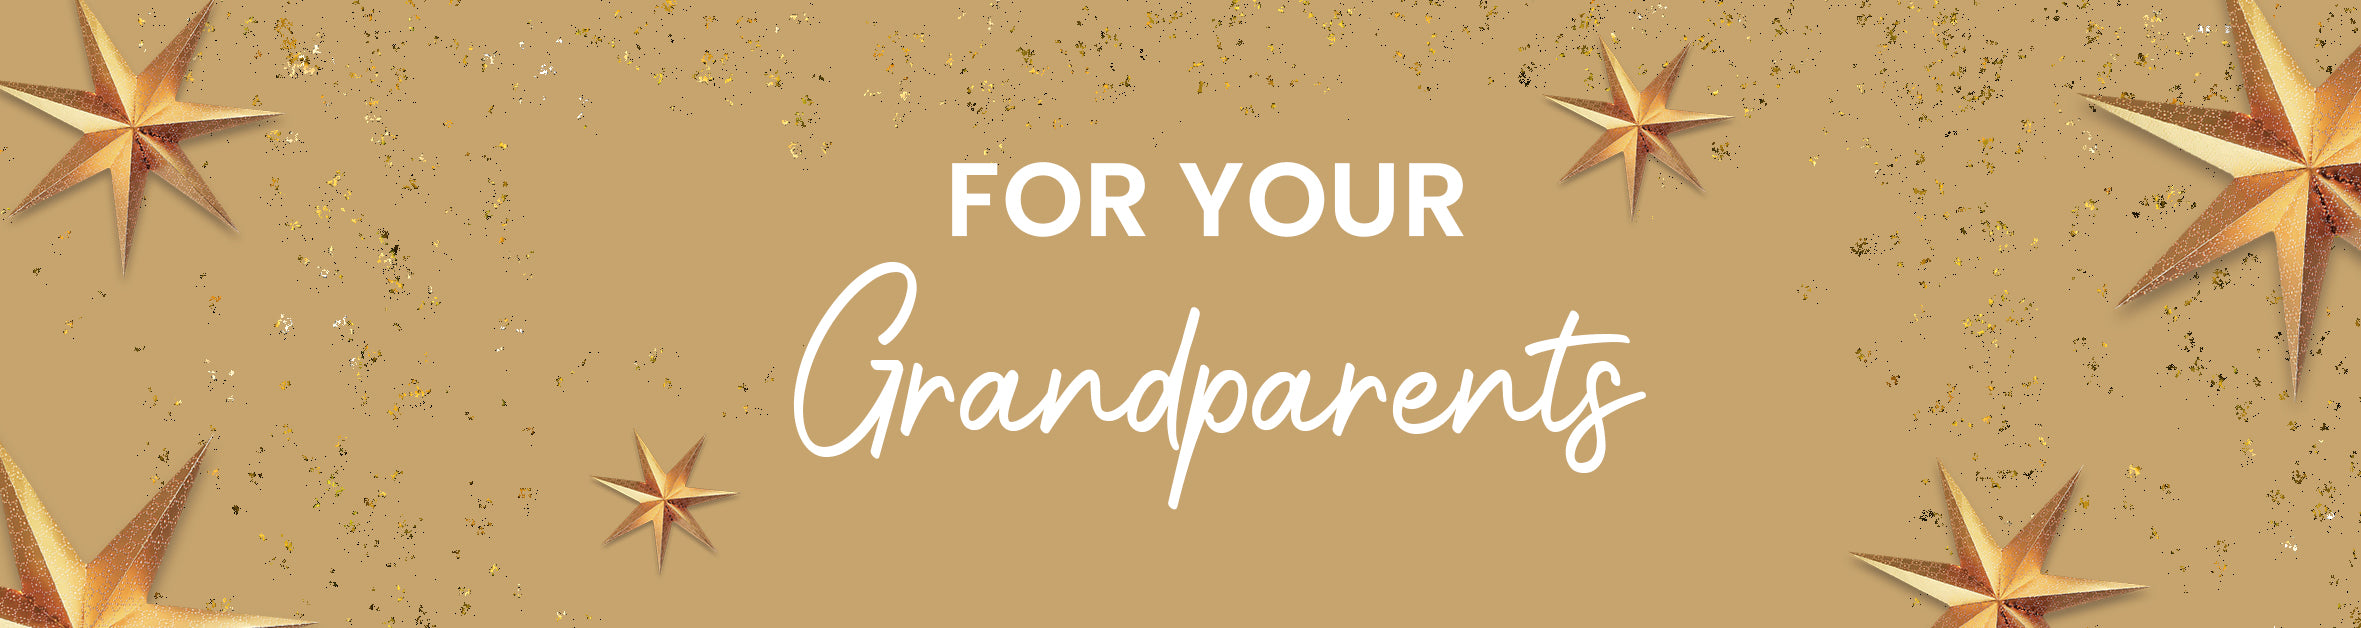 Holiday Gifts for Grandparents